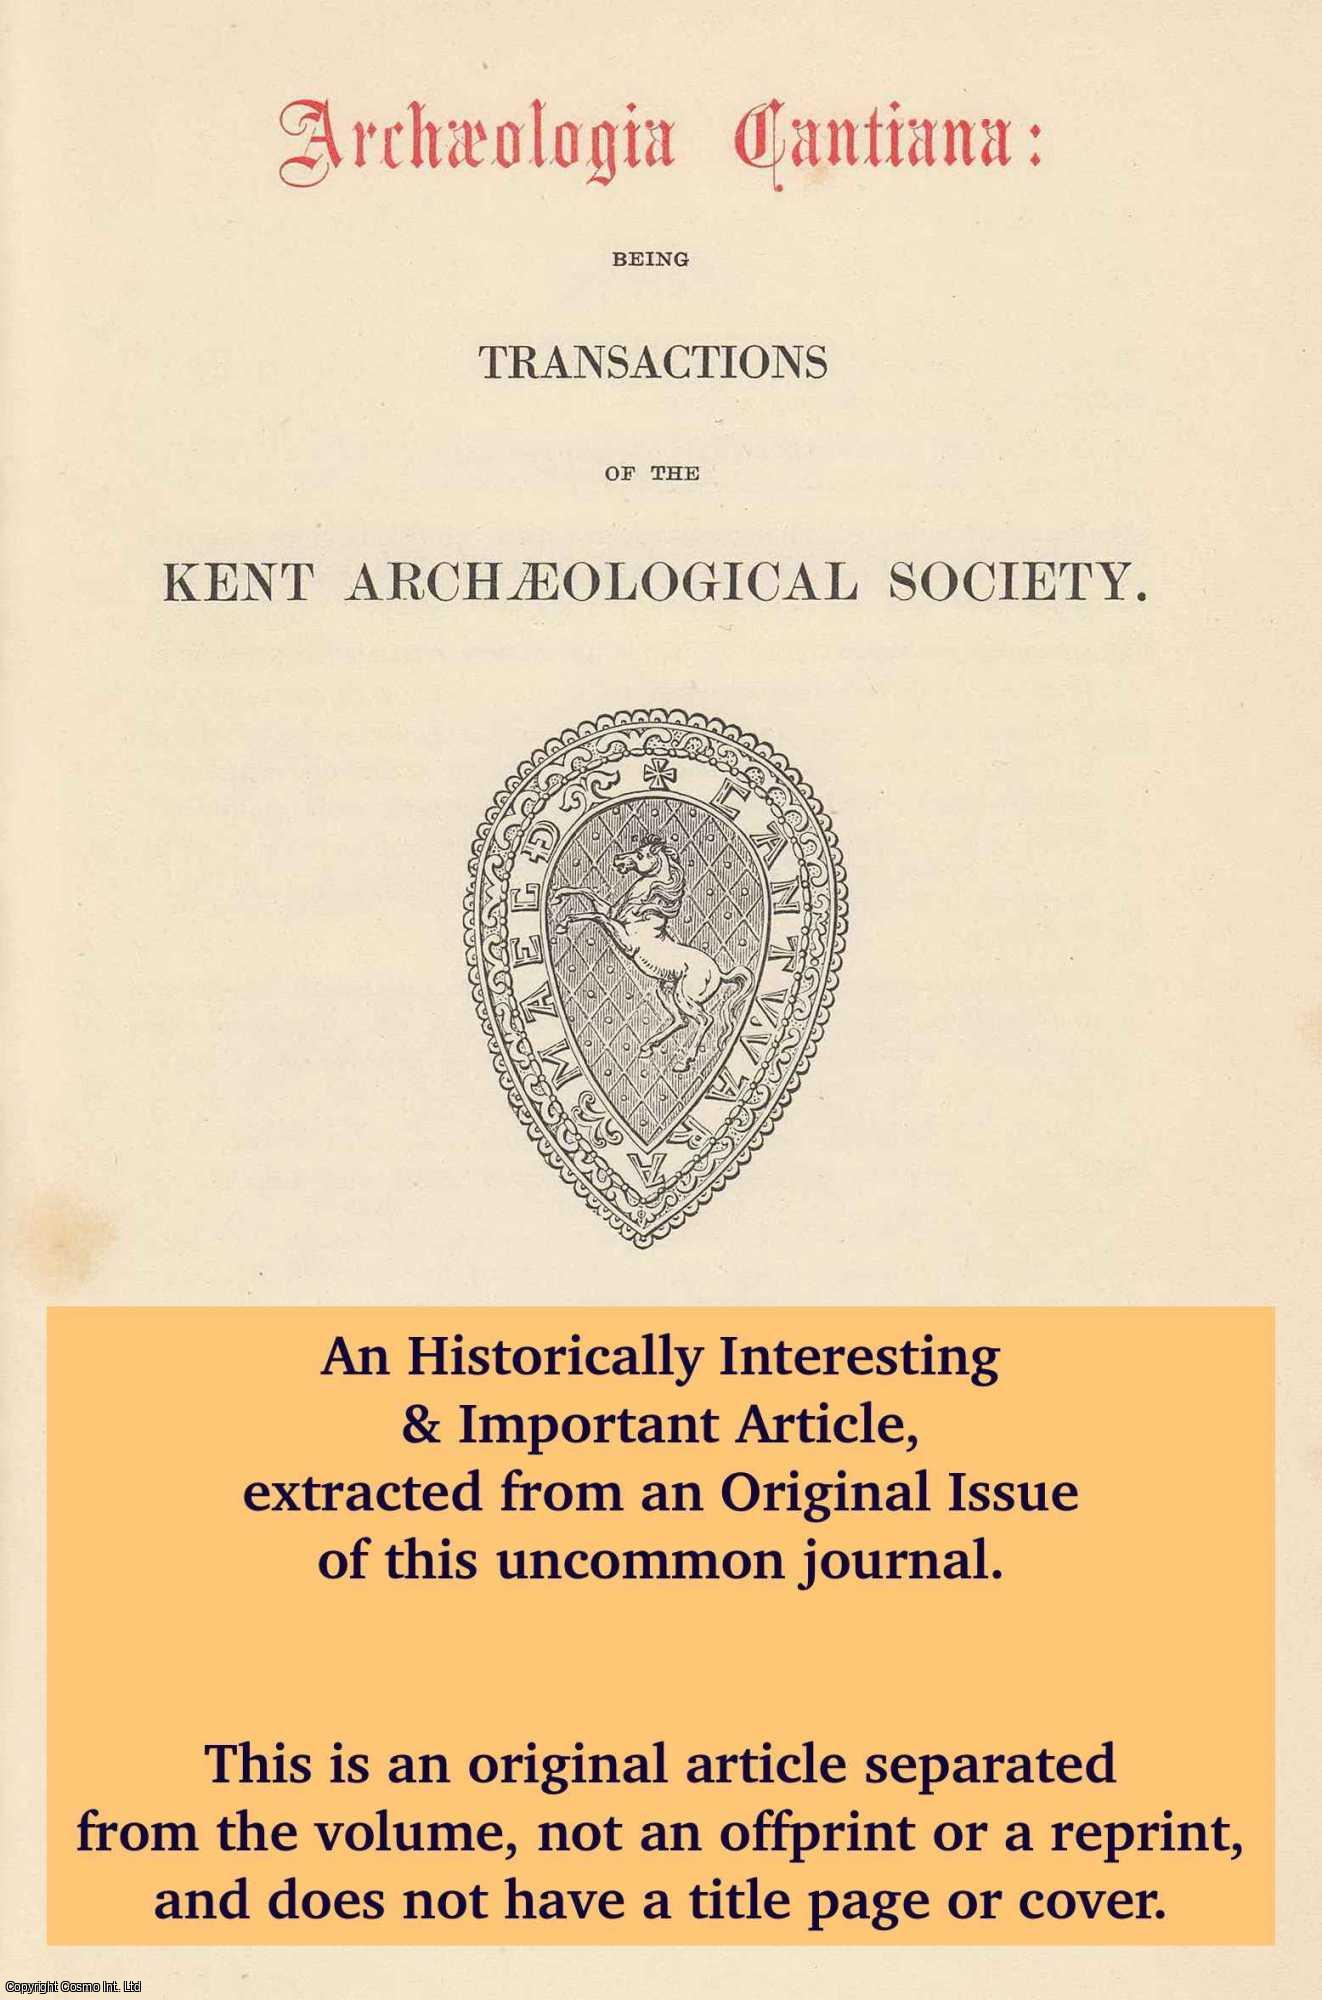 D. Stephenson - More Decorative Ironwork. An original article from The Archaeologia Cantiana: Transactions of The Kent Archaeological Society, 1977.